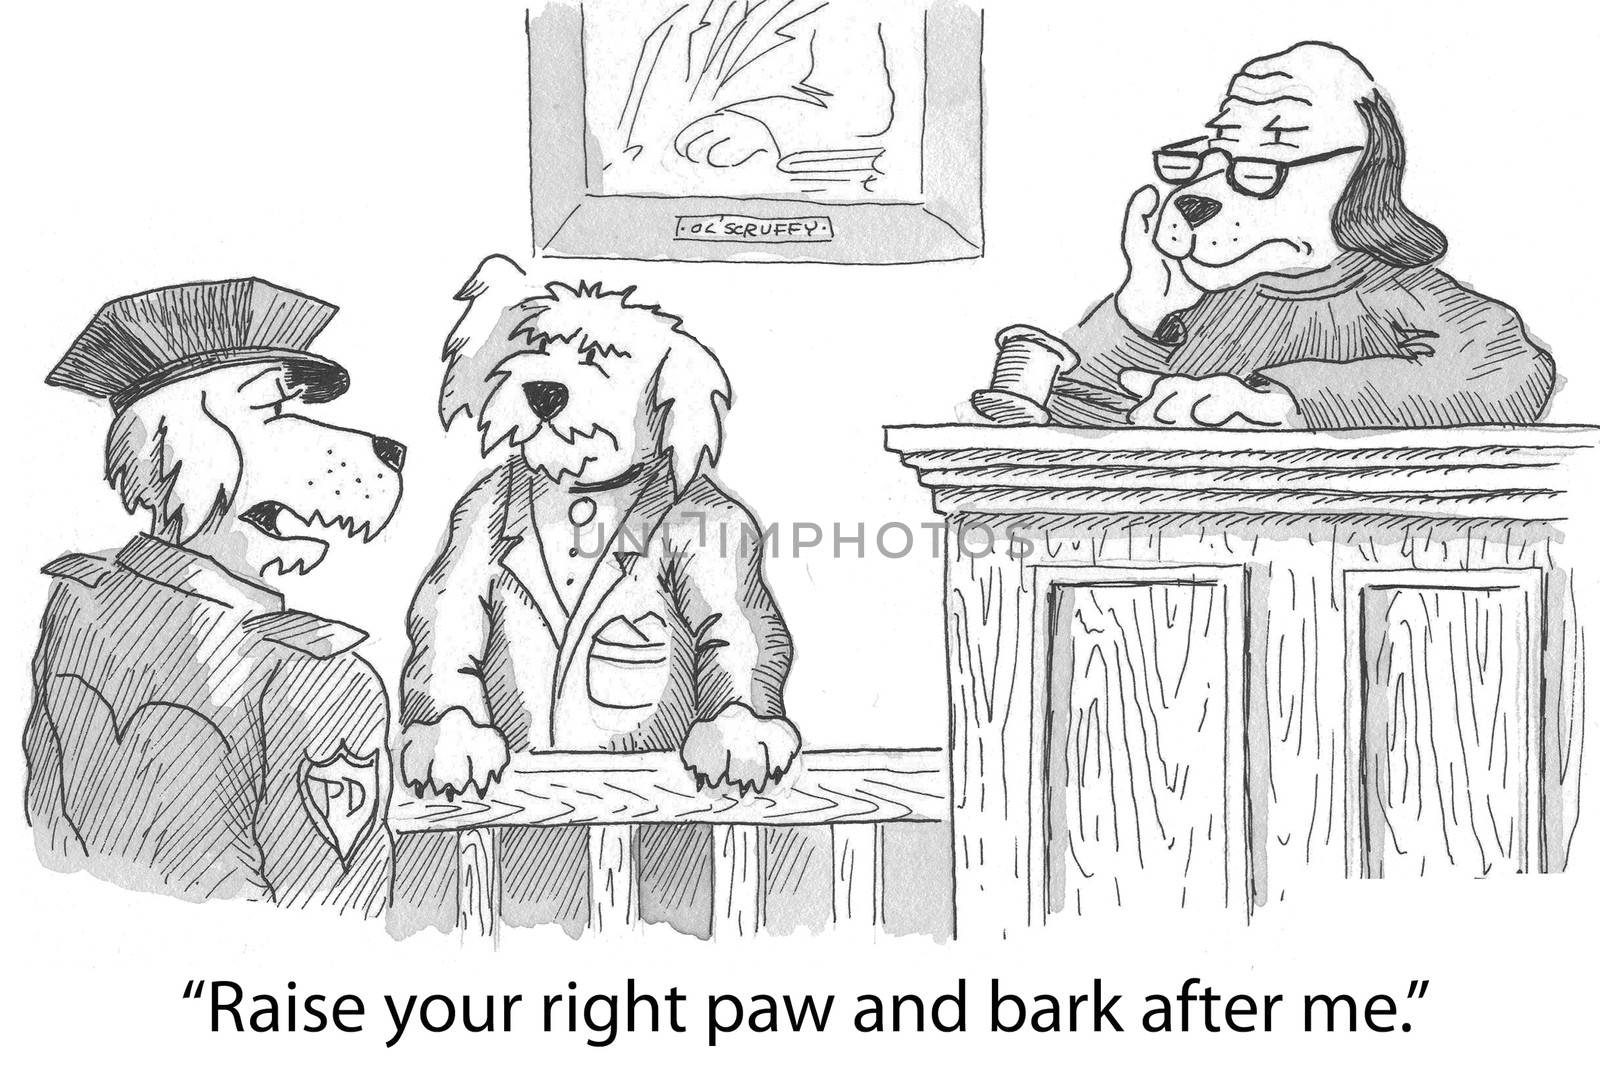 "Raise your right paw and bark after me."